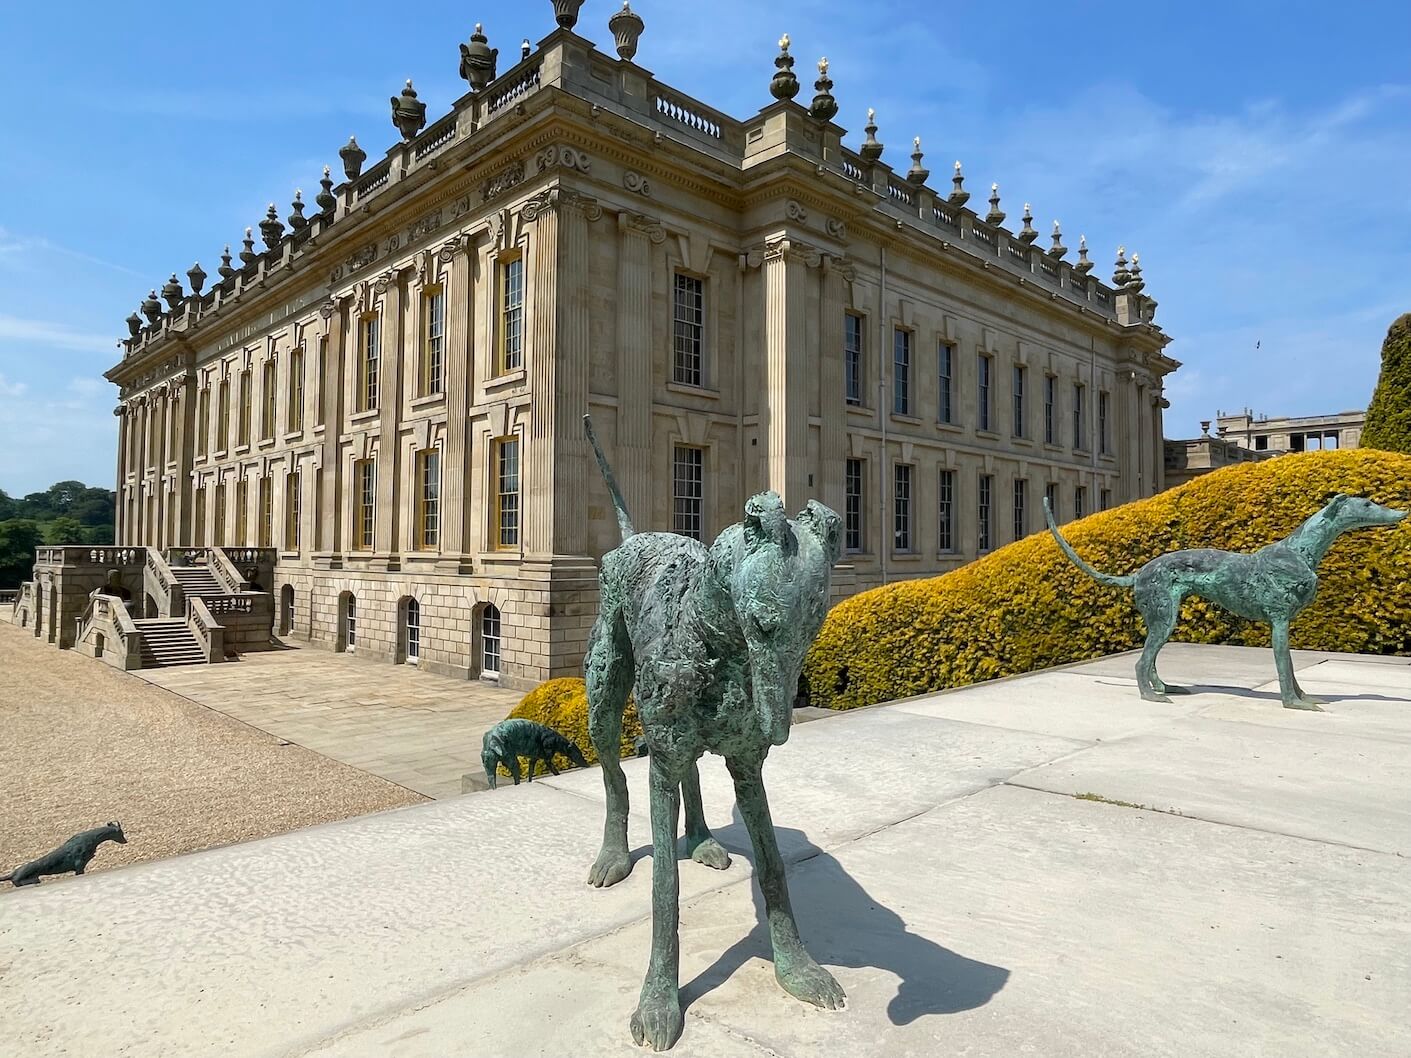 sculptures inside and outside Chatsworth House